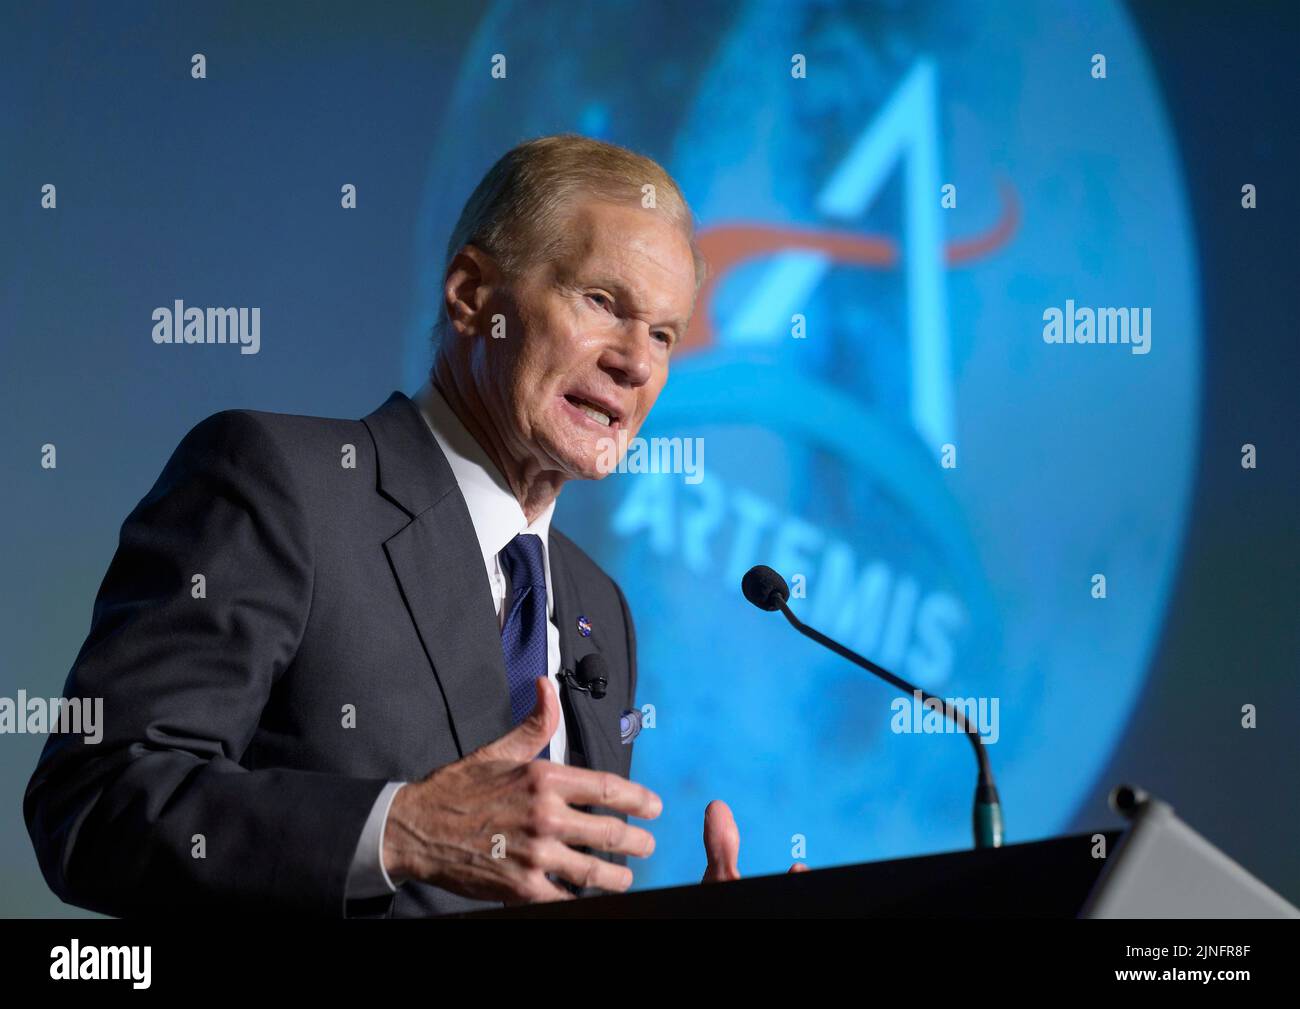 NASA Administrator Bill Nelson speaks during a NASA briefing on the Artemis I Moon mission at the Mary W. Jackson NASA Headquarters building, August 3, 2022 in Washington, D.C. The NASA Artemis I mission is the first integrated test of the deep space exploration systems: the Orion spacecraft, Space Launch System rocket, and supporting ground systems. Stock Photo